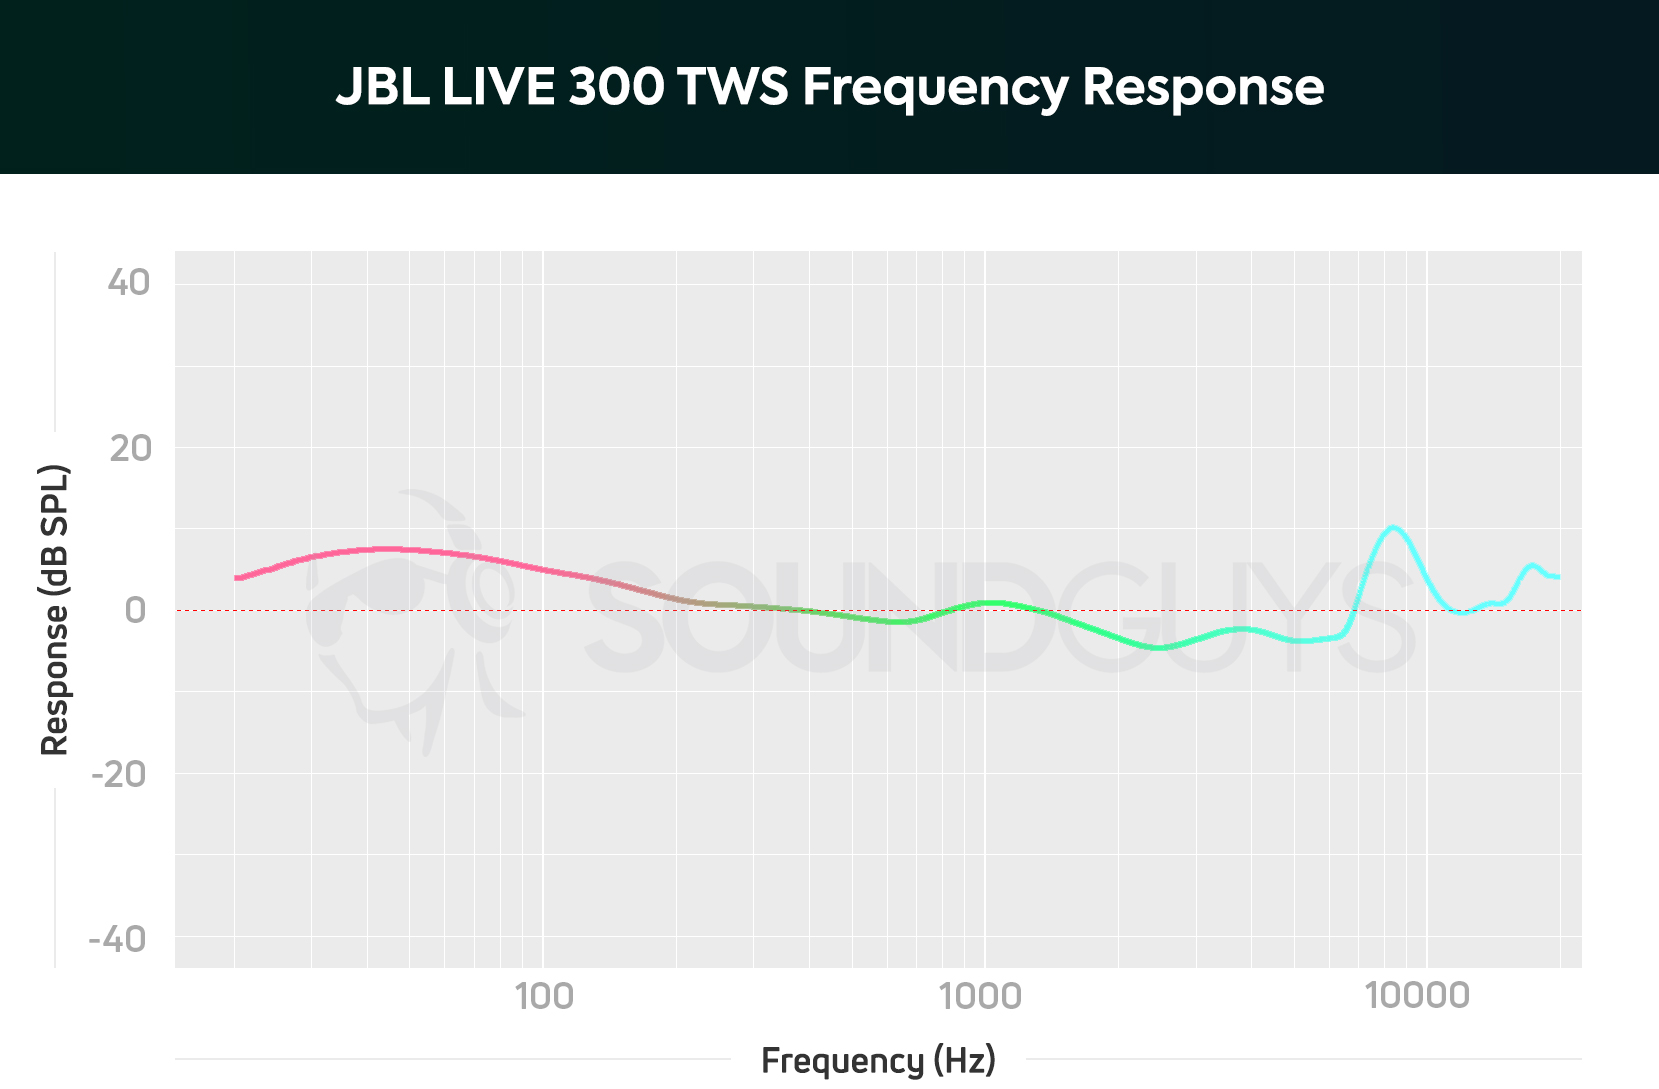 A frequency response chart of the JBL LIVE 300 TWS true wireless earbuds frequency response with slightly elevated bass notes made to sound nearly twice as loud as mids.